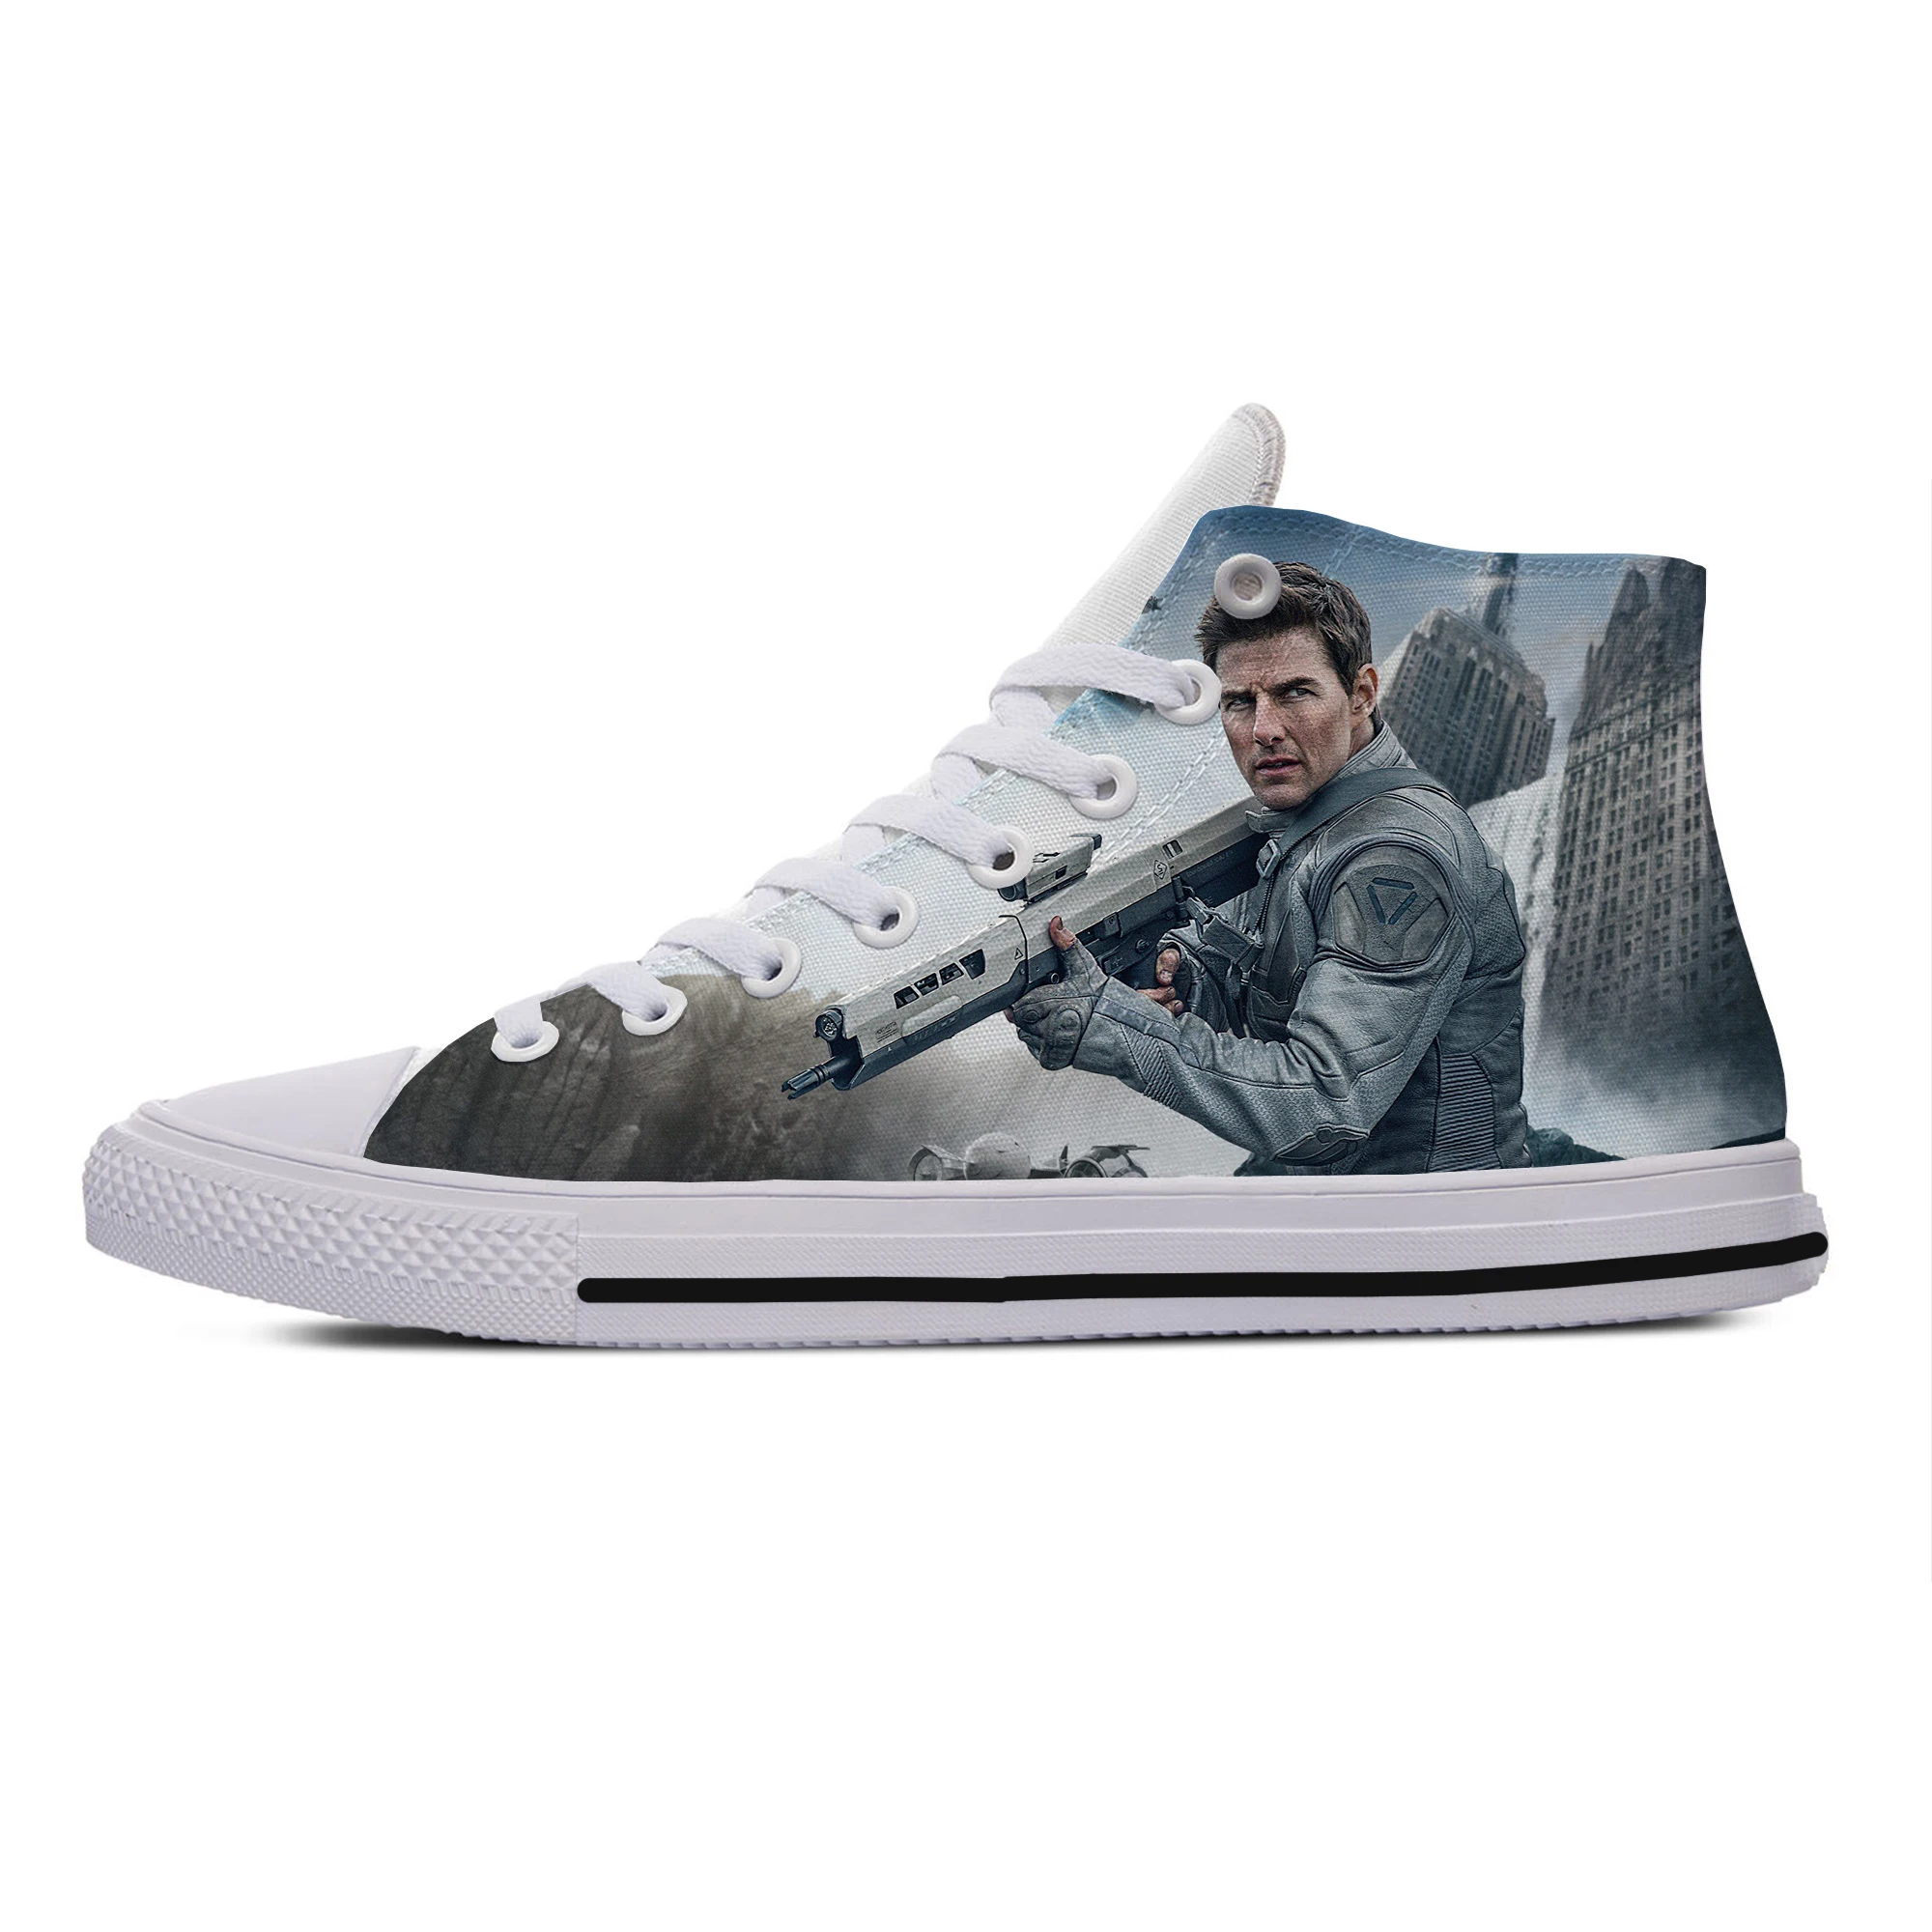 

Hot Latest Summer Men Women Celebrity Tom Cruise Shoes Leisure Fashion Lightweight Breathable Canvas Shoes High Top Board Shoes